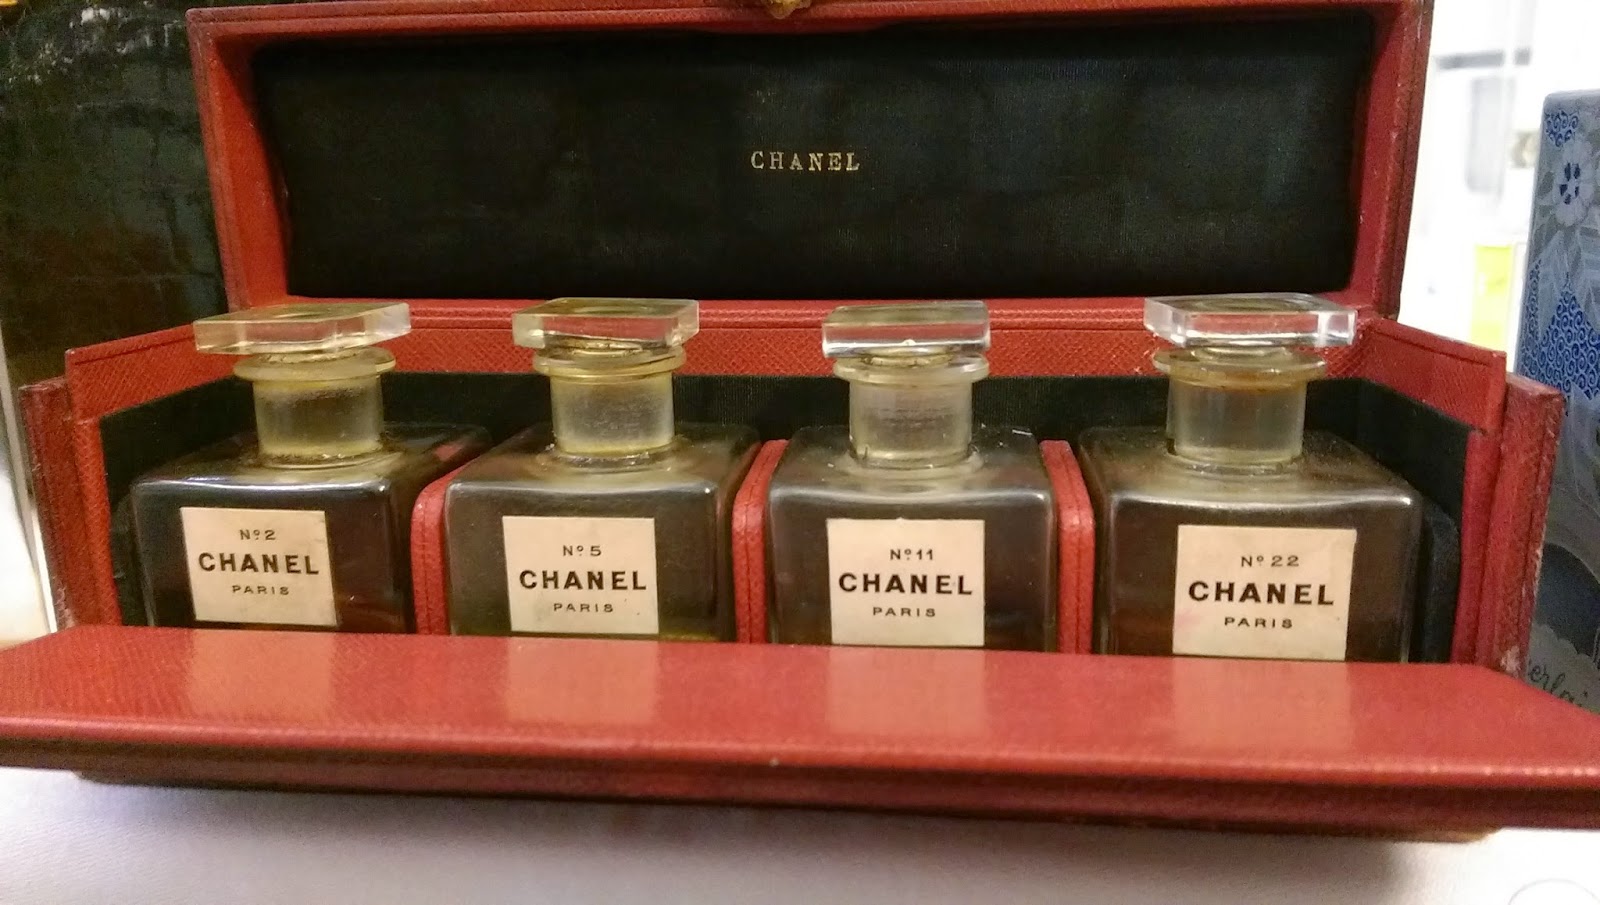 The original samples of Chanel perfumes